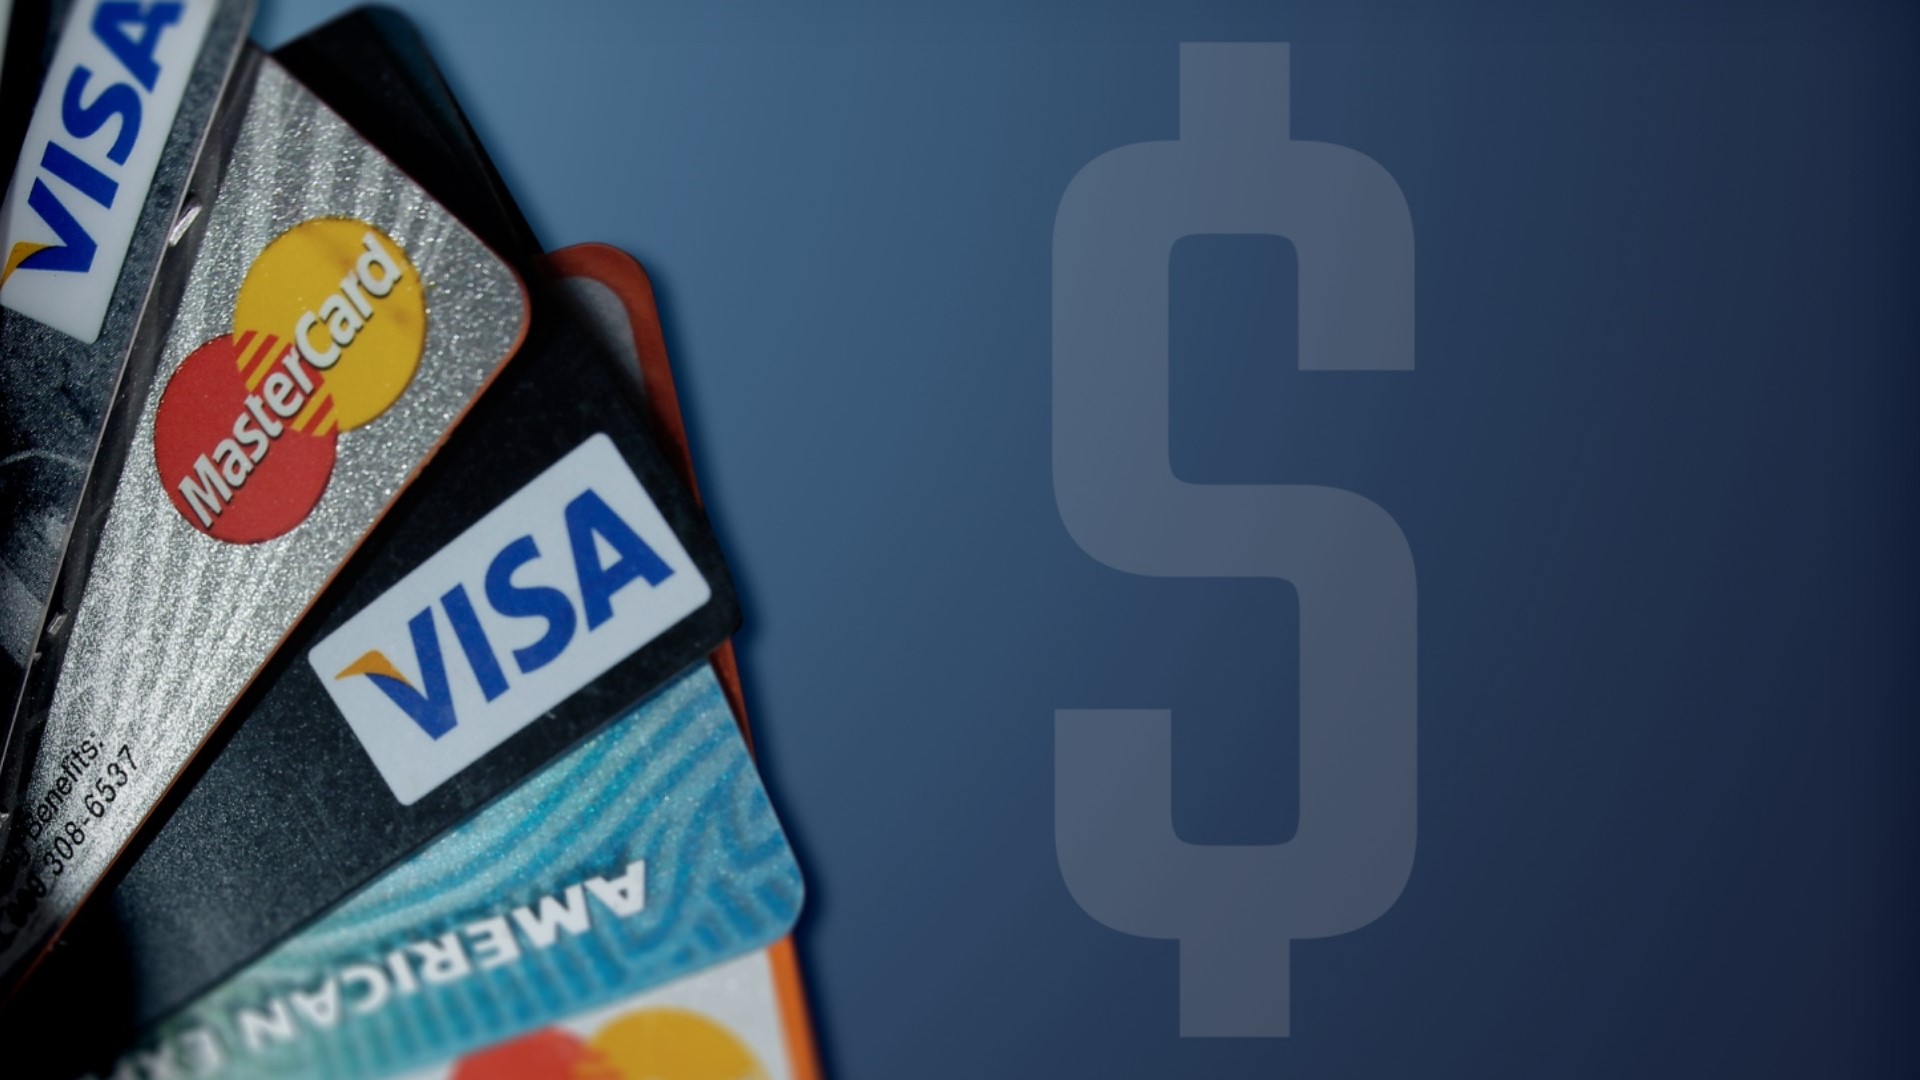 Credit card debt is at an all-time high. FOX43 Finds Out a simple way you may be able to lower